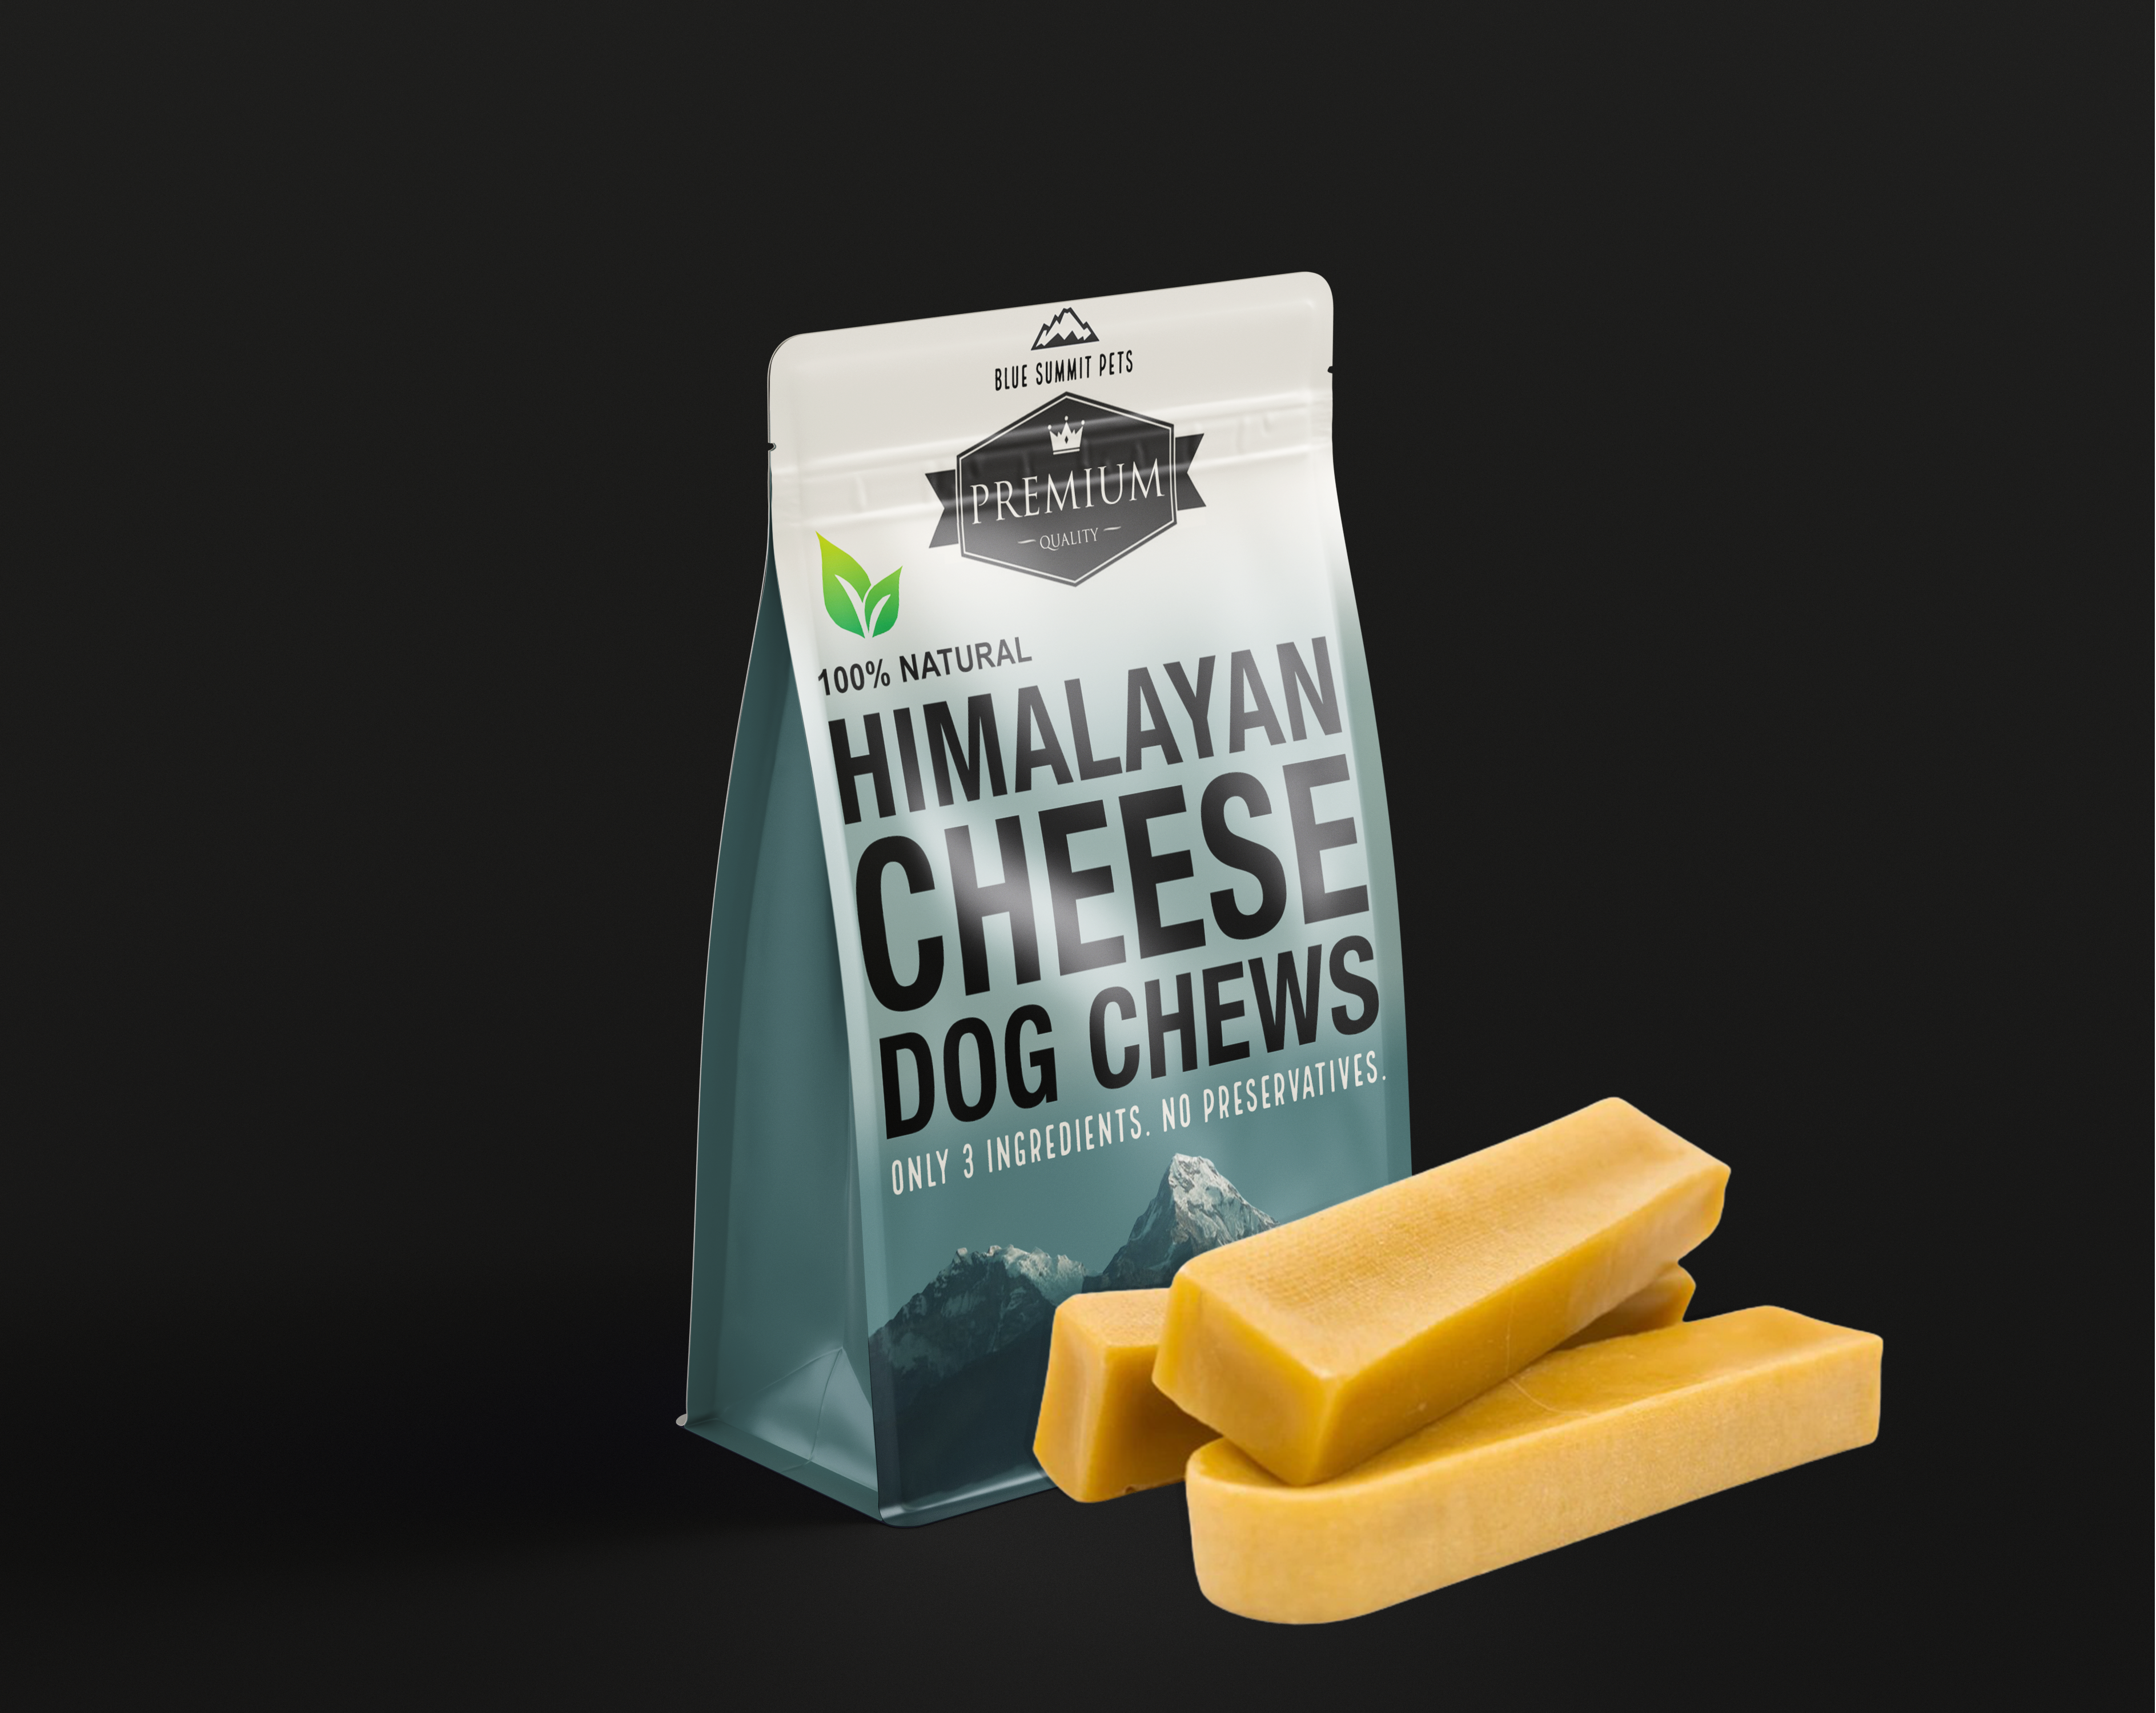 Introducing Himalayan Dog Chew - The Ultimate Canine Treat!